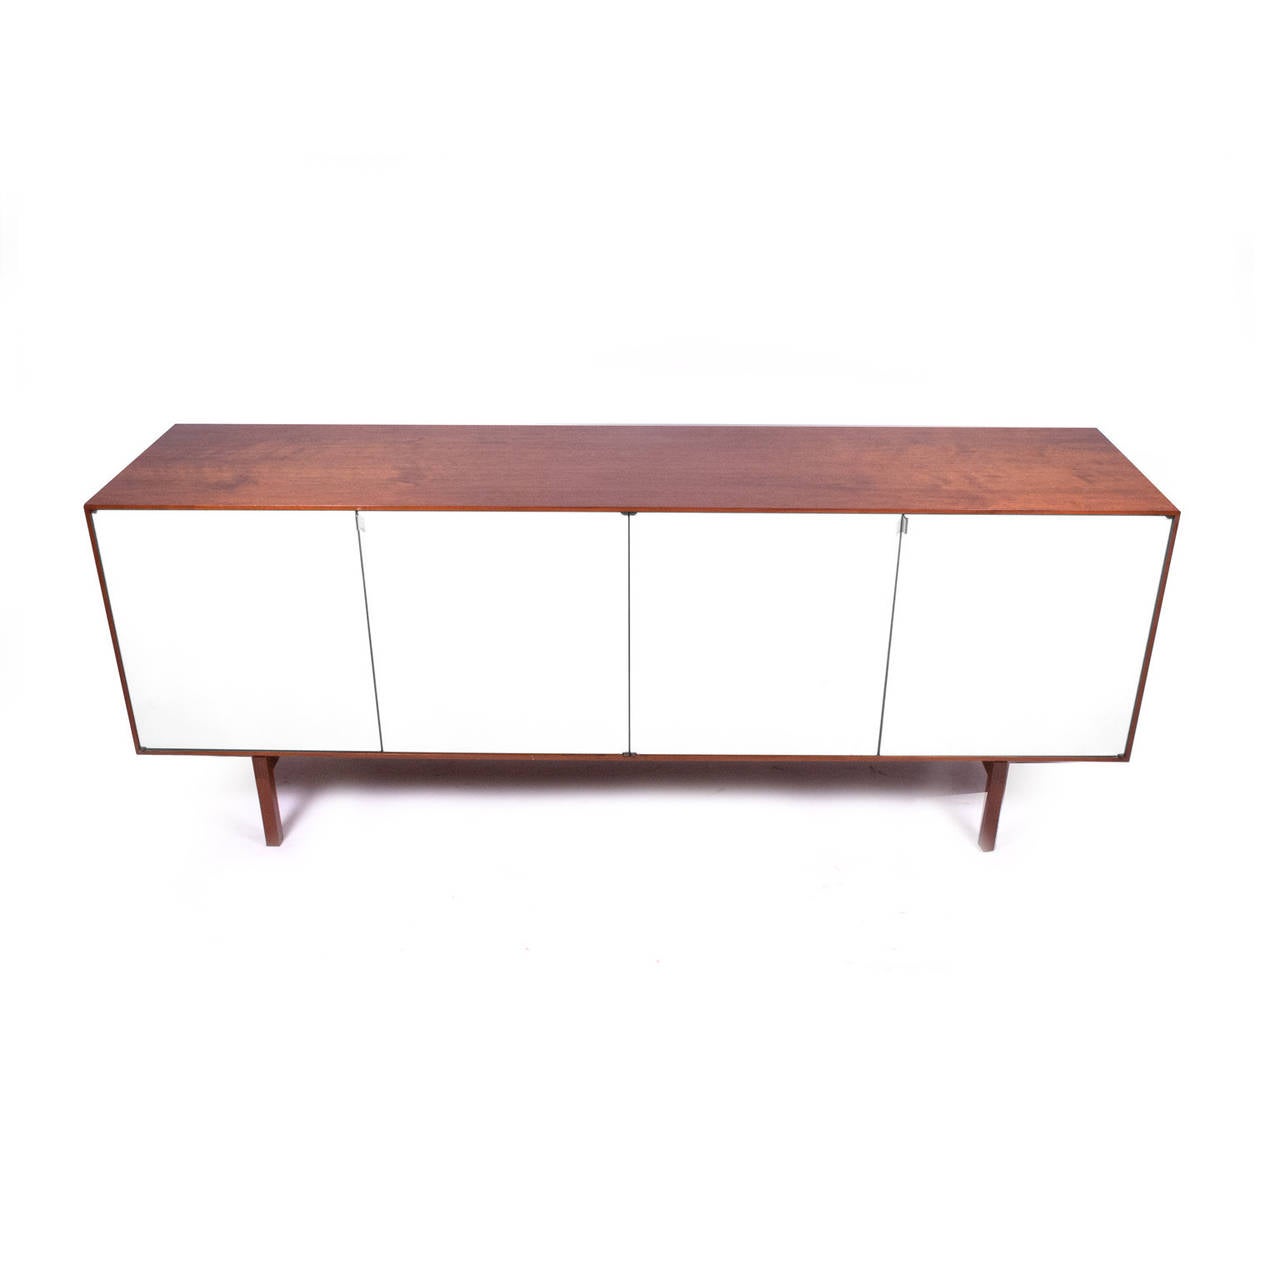 Teak cabinet with white lacquer doors interior with oak lacquer finish, two silver drawers four adjustable shelves. This credenza won the MOMA Good Design Award in 1950. Made by Knoll Associates.